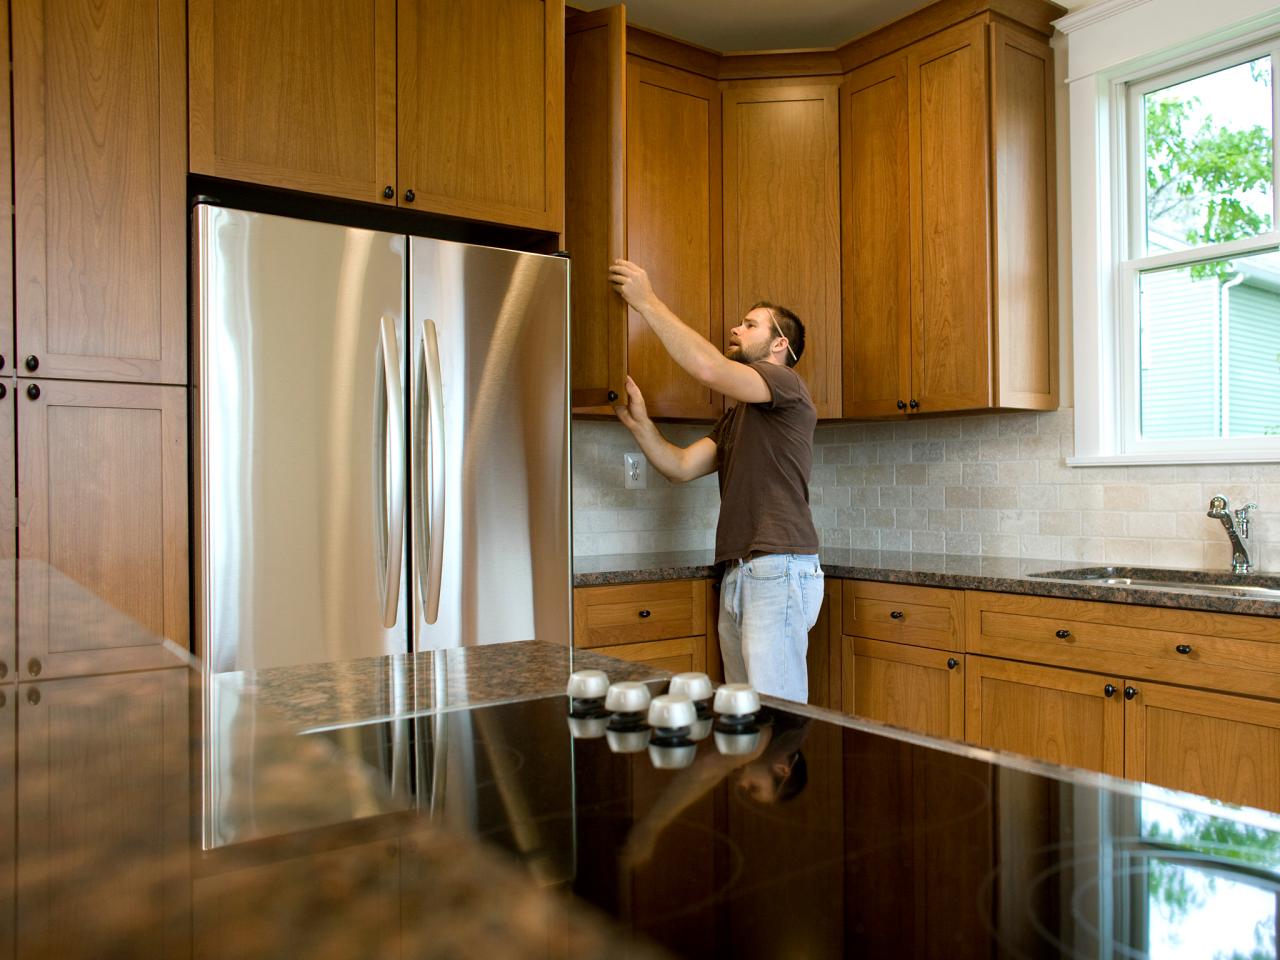 How To Install Kitchen Cabinets, What Tools Do You Need To Install Kitchen Cabinets